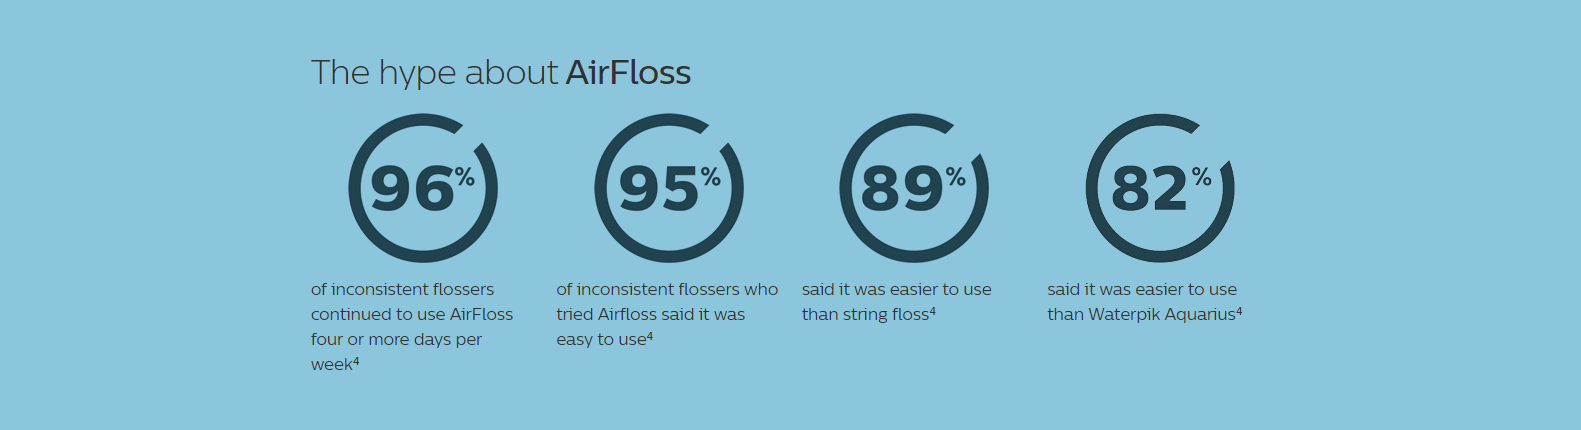 Philips Sonicare Airfloss Wholesale